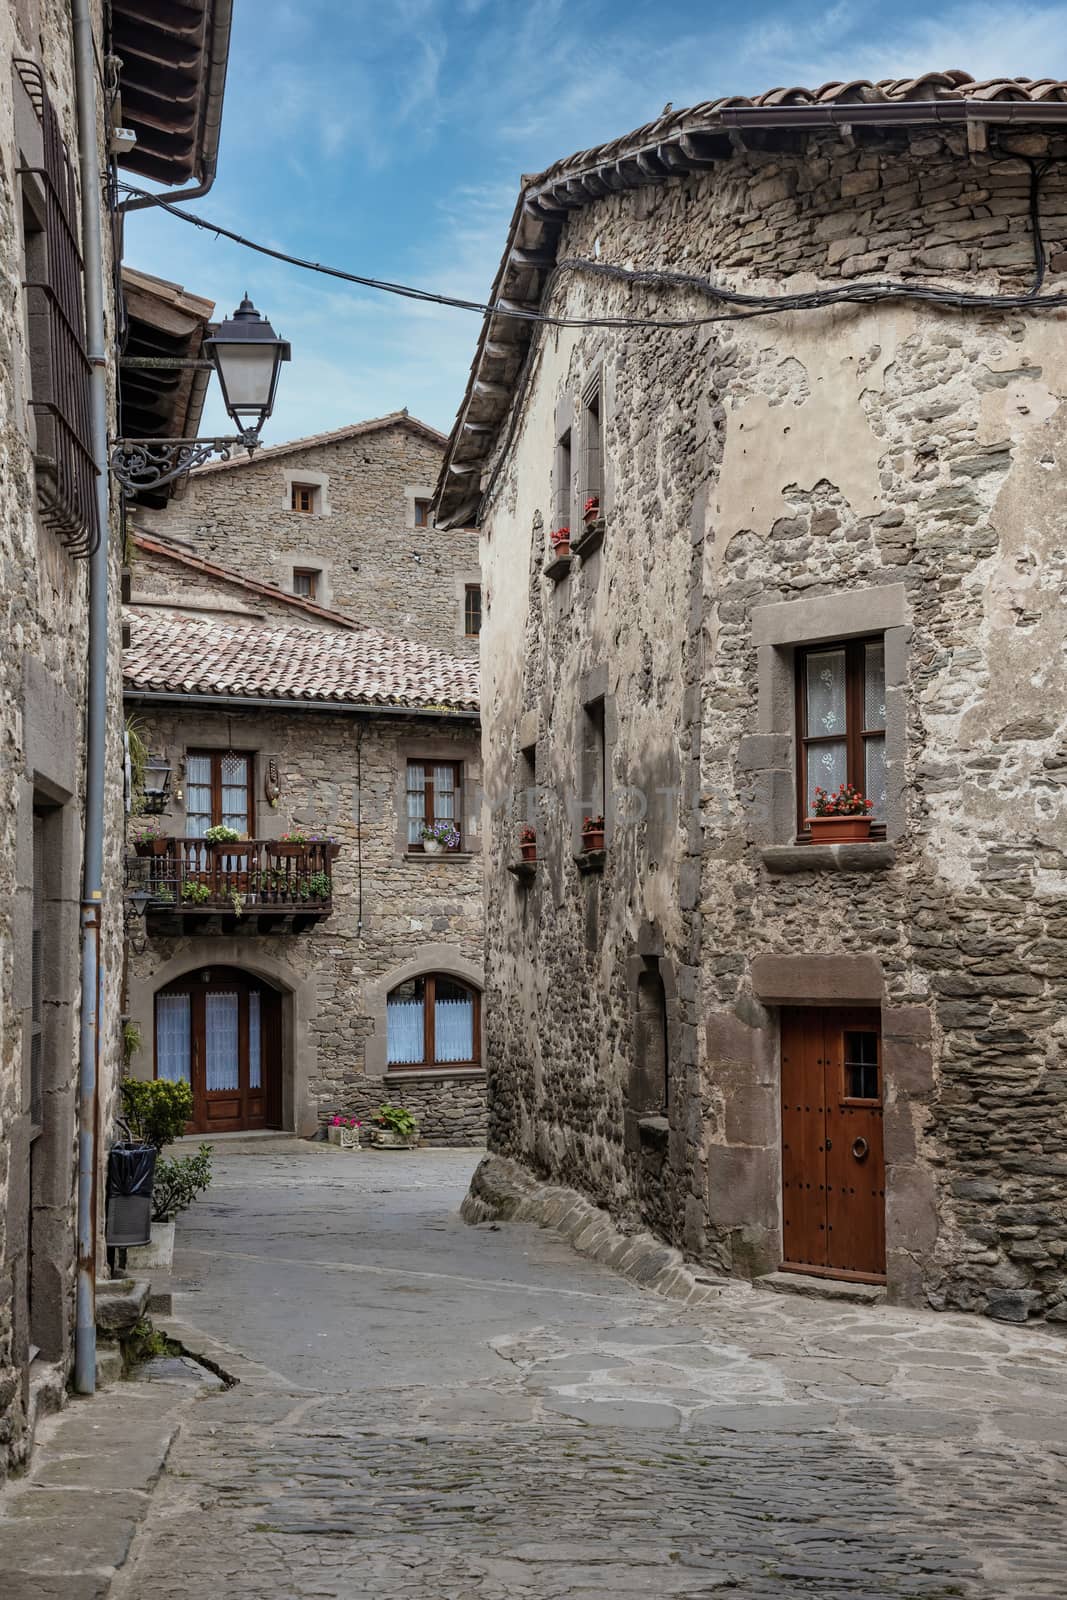 Streets of medieval village of Rupit, Catalonia of Spain by Digoarpi